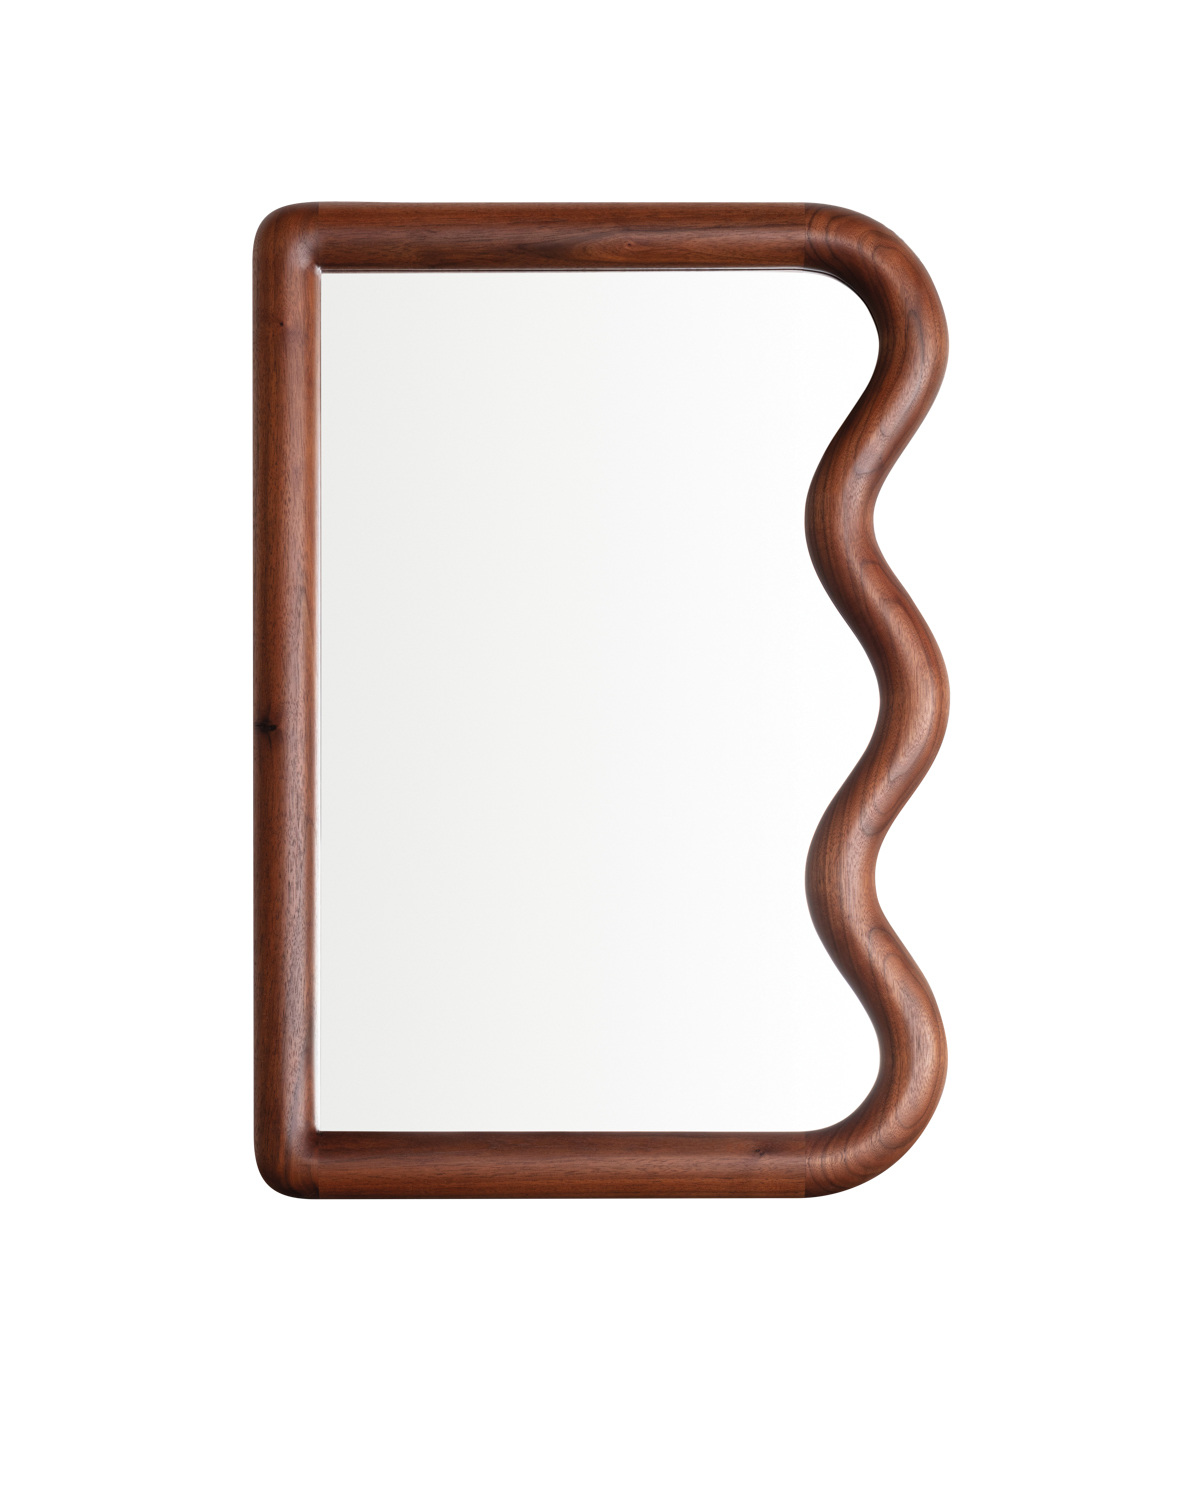 mirror with wood edges and one wavy side